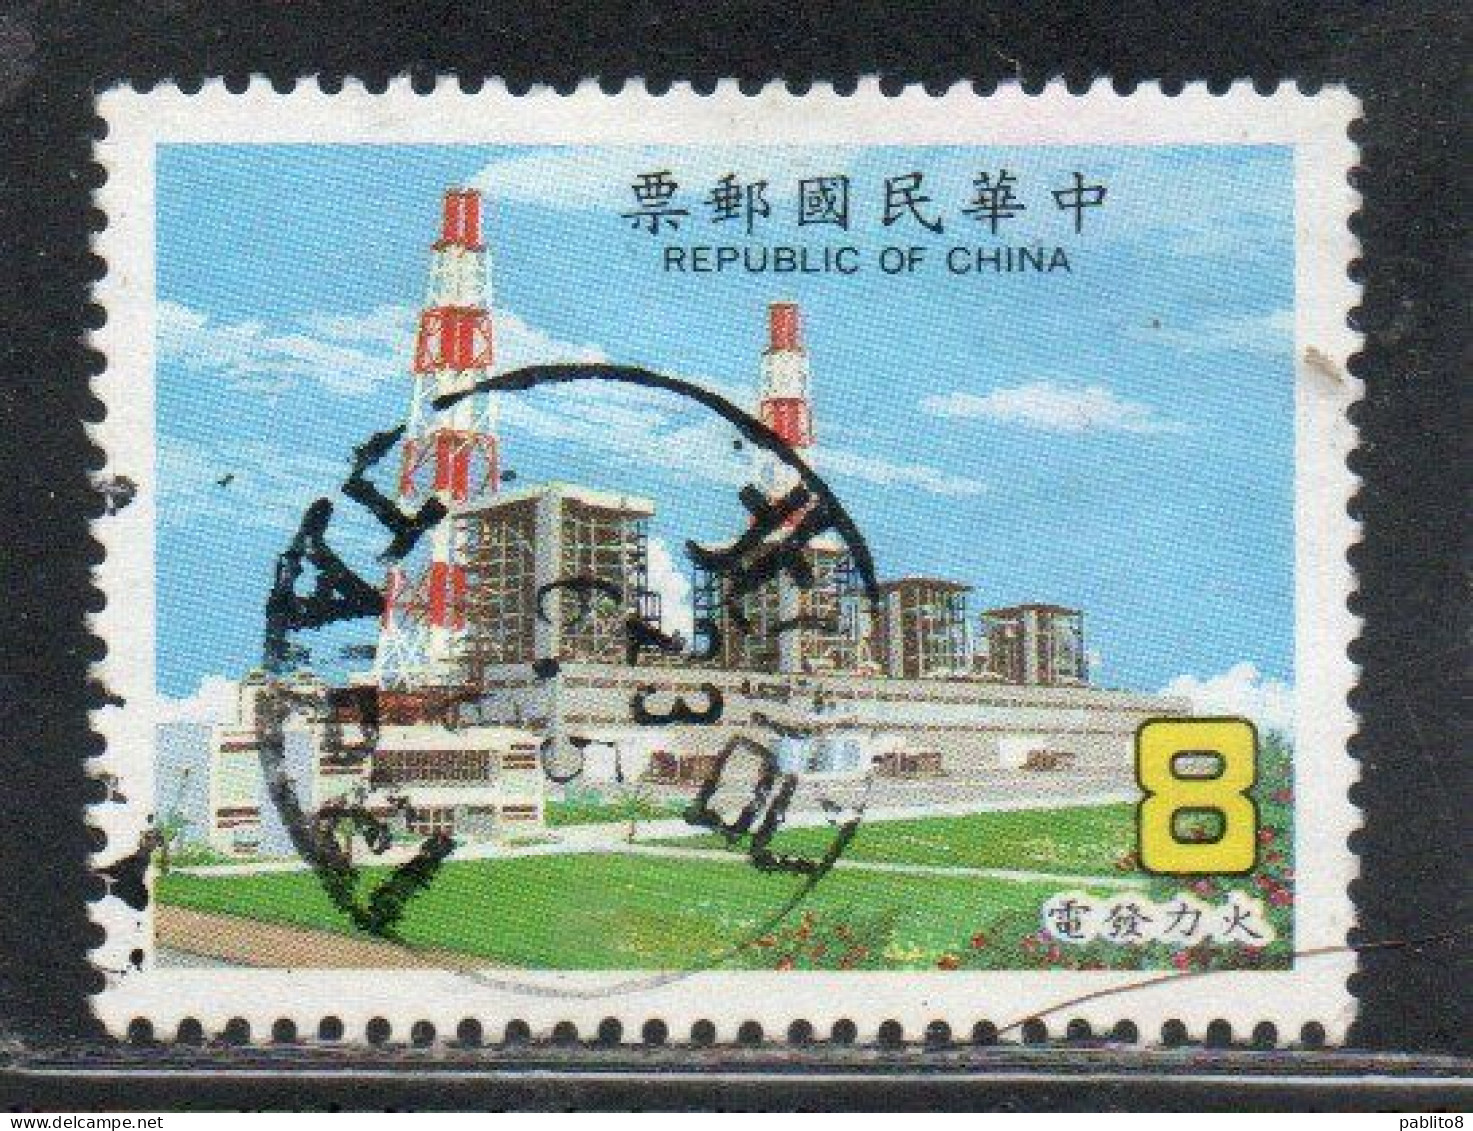 CHINA REPUBLIC CINA TAIWAN FORMOSA 1986 ECONOMIC PROSPERITY TROUGHT ENERGY DEVELOPMENT THERMO-ELECTRIC 8$ USED USATO - Used Stamps